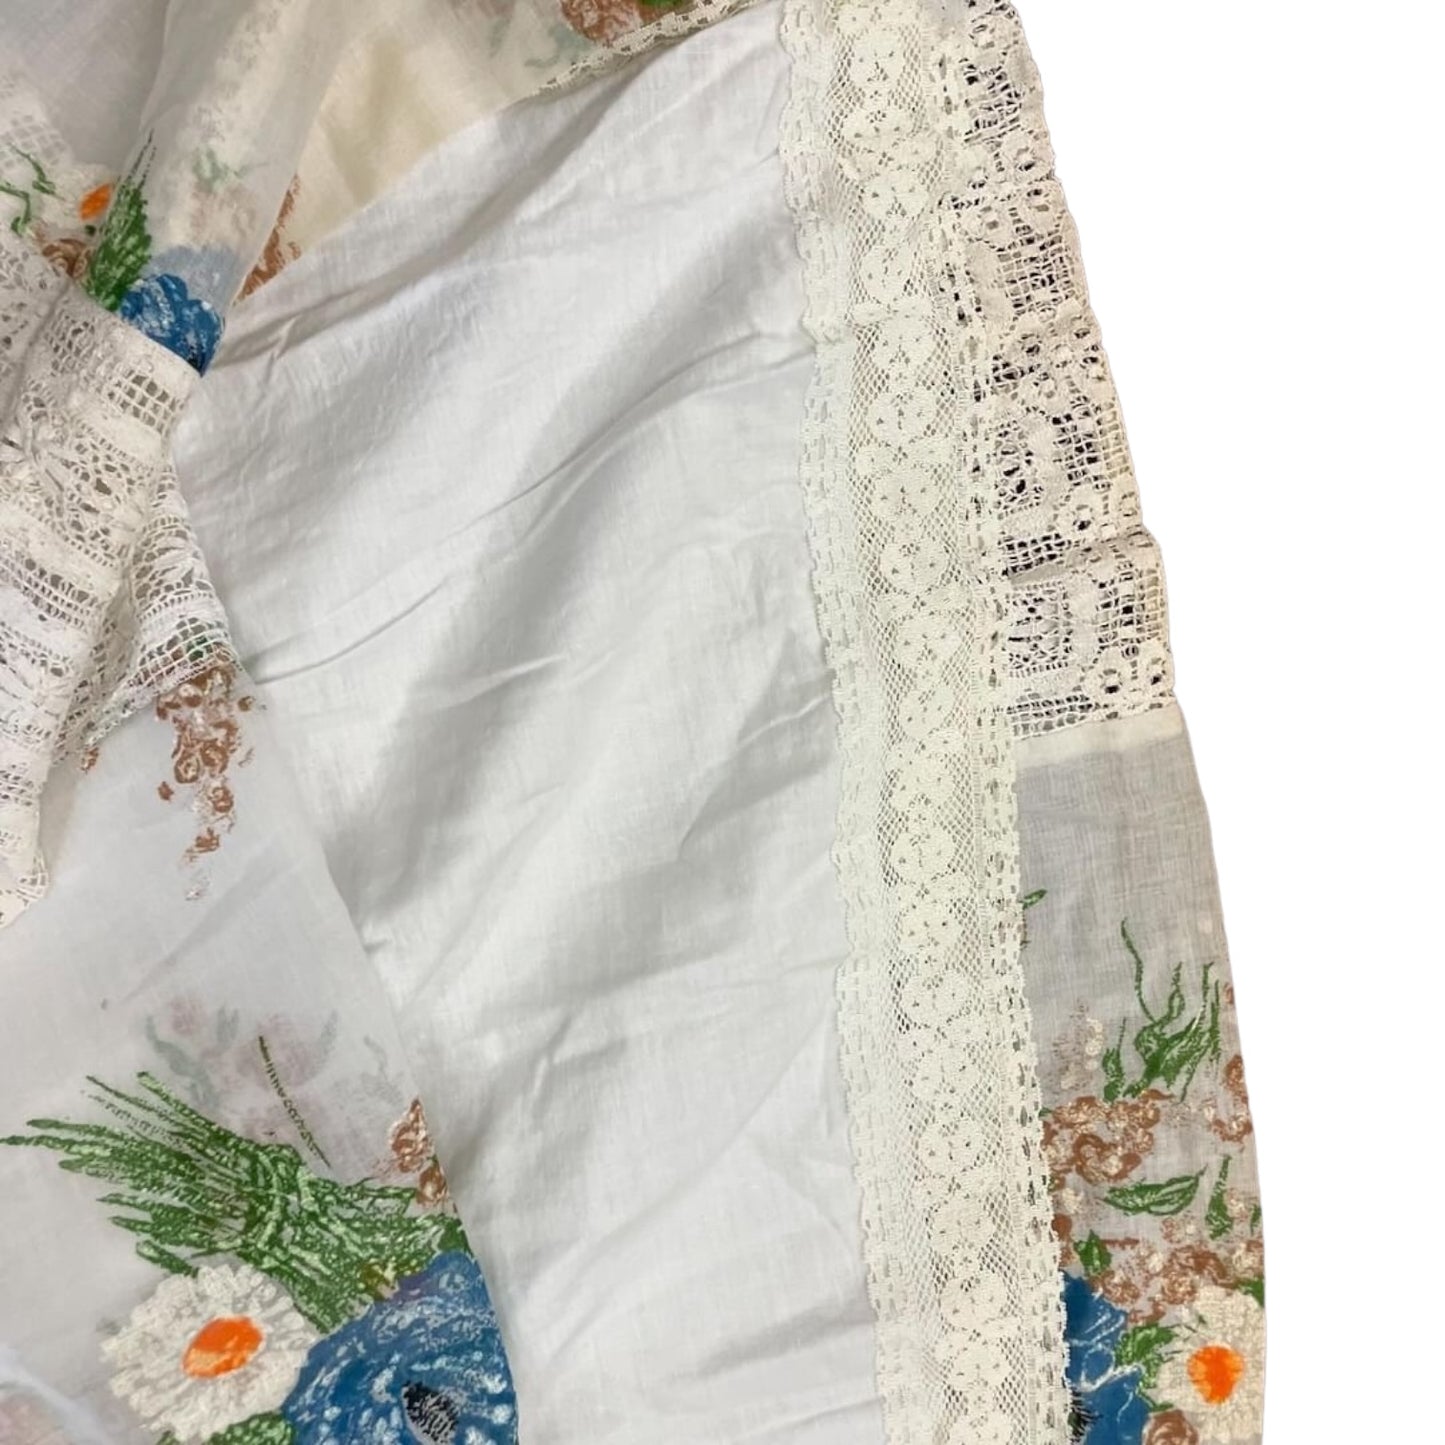 Vintage 1970s Maxi Skirt with Lace & Floral Panels